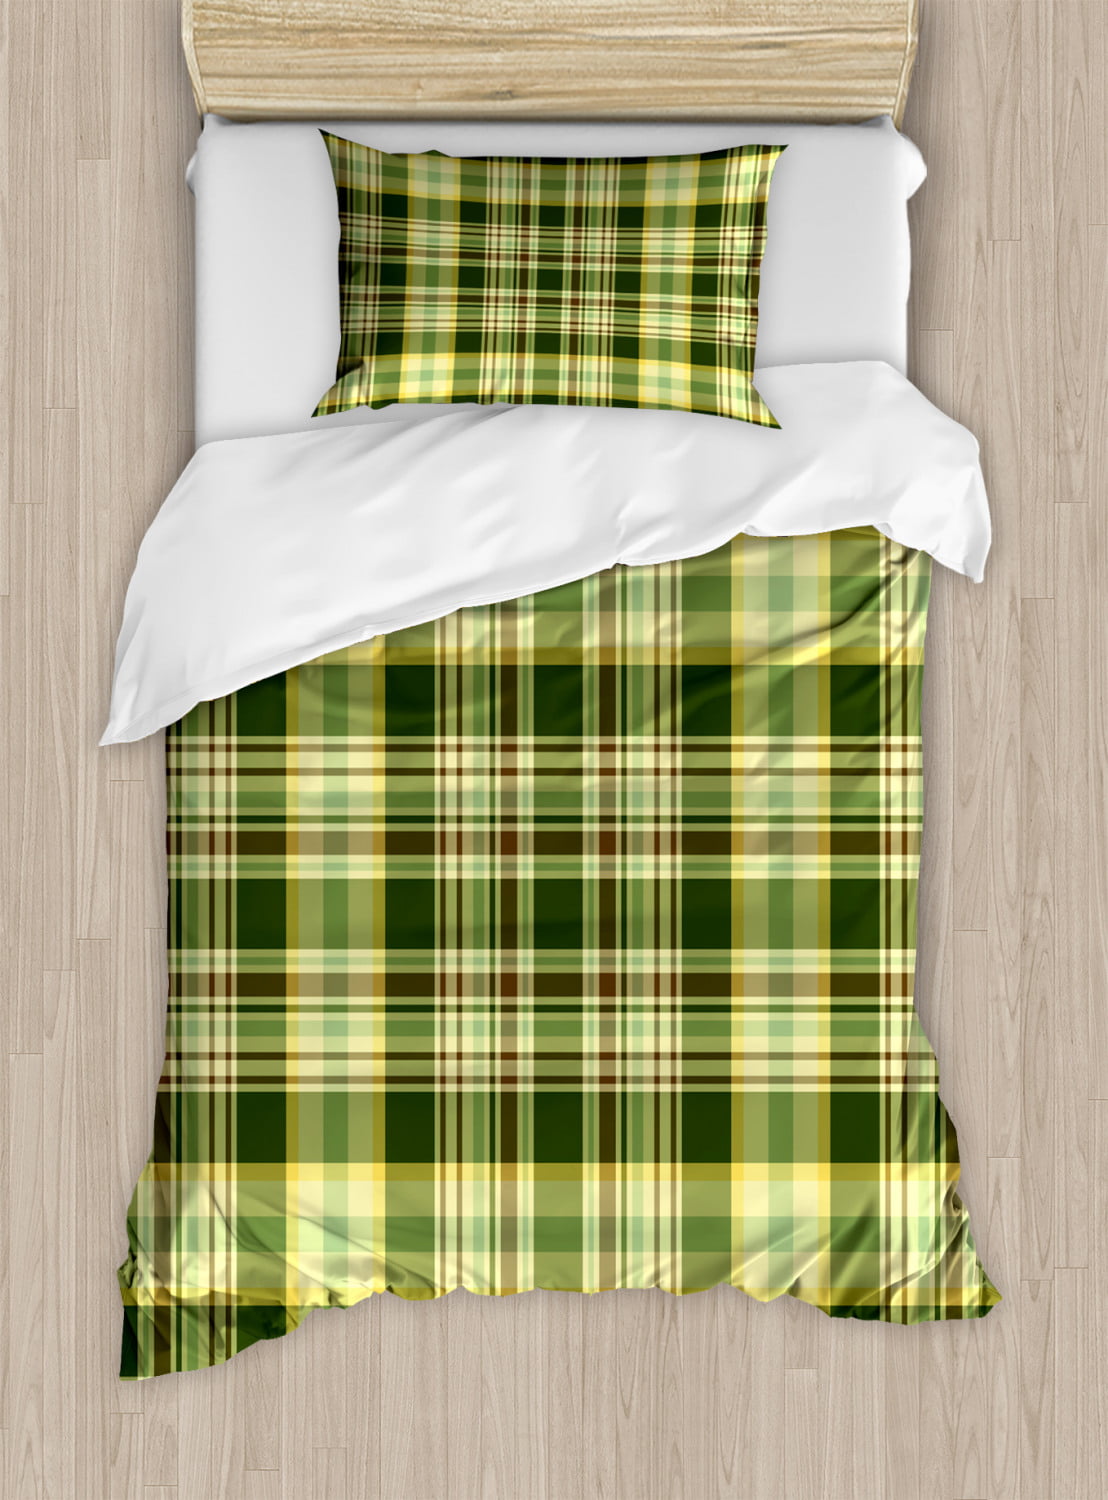 Olive Green Duvet Cover Set Twin Size, Green And Yellow Duvet Covers